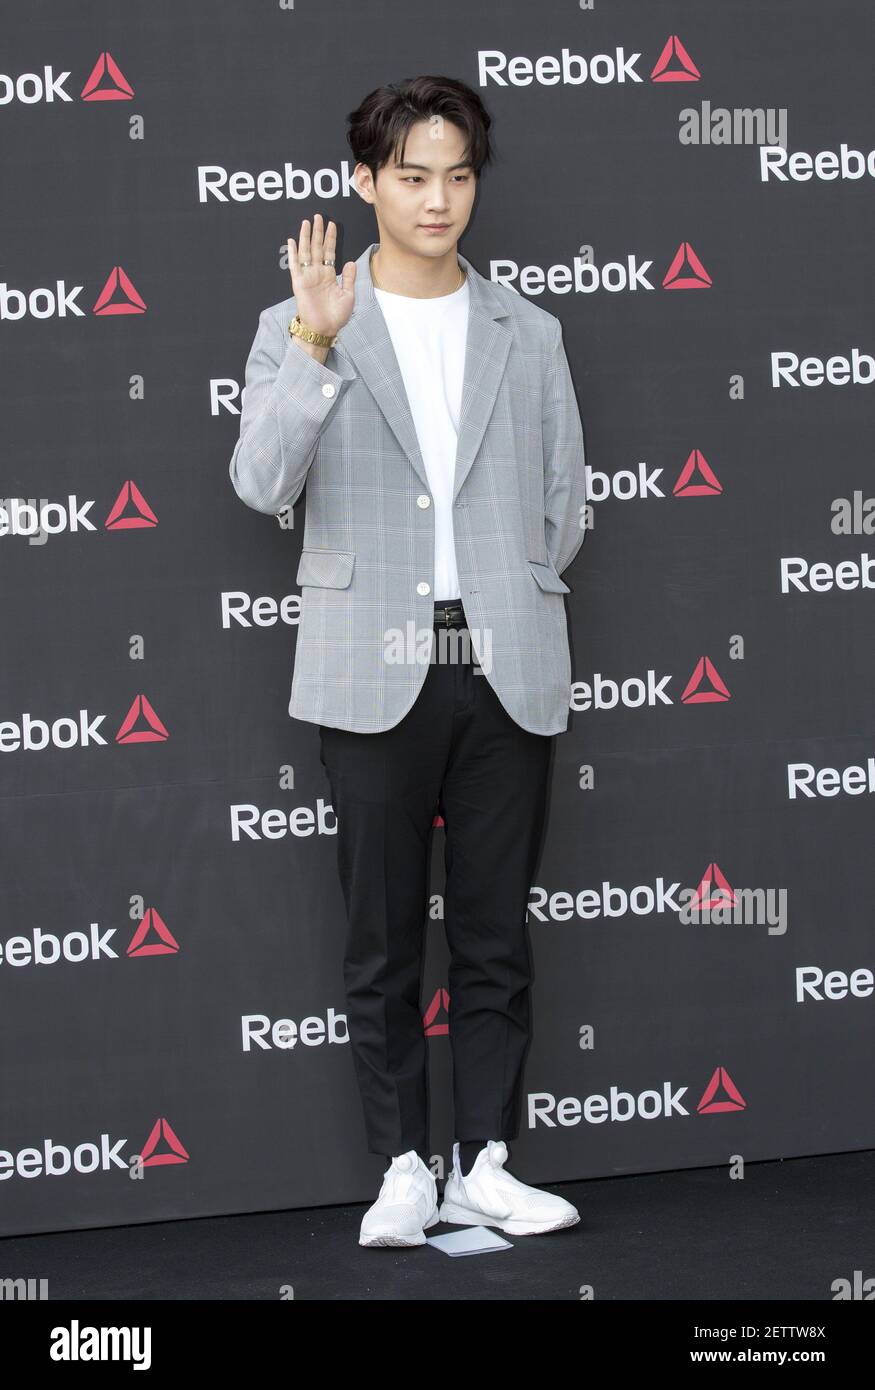 26 May 2017 - Seoul, South Korea : K-Pop Boys group GOT7 member JB, attends  photo call for the Reebok Shoes launching in Seoul, South Korea on May 26,  2017. Photo Credit: